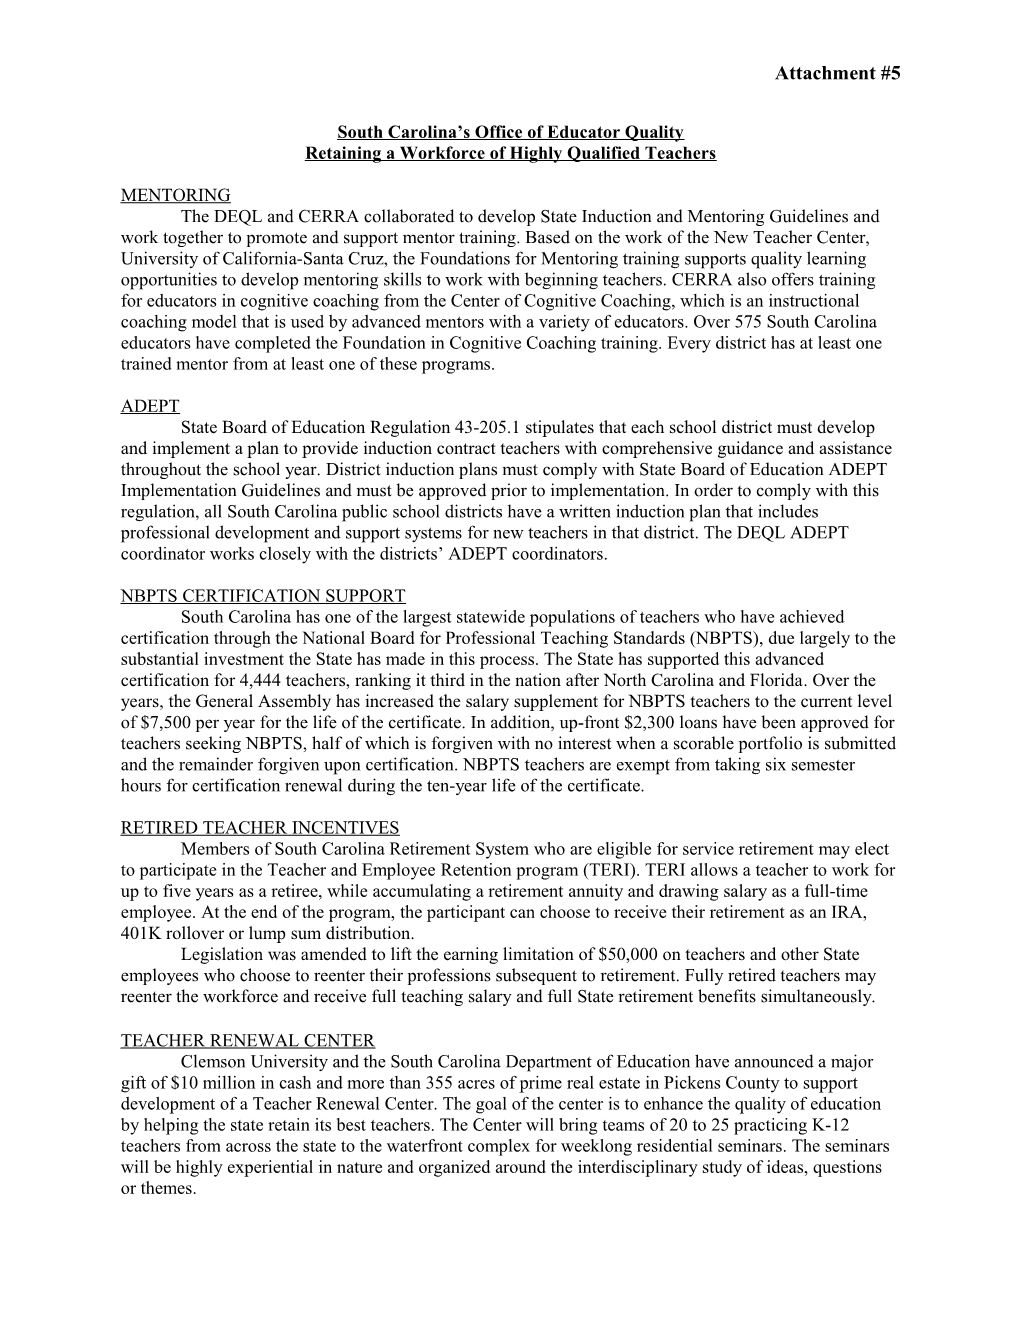 South Carolina S Office of Educator Quality Information (MS WORD)